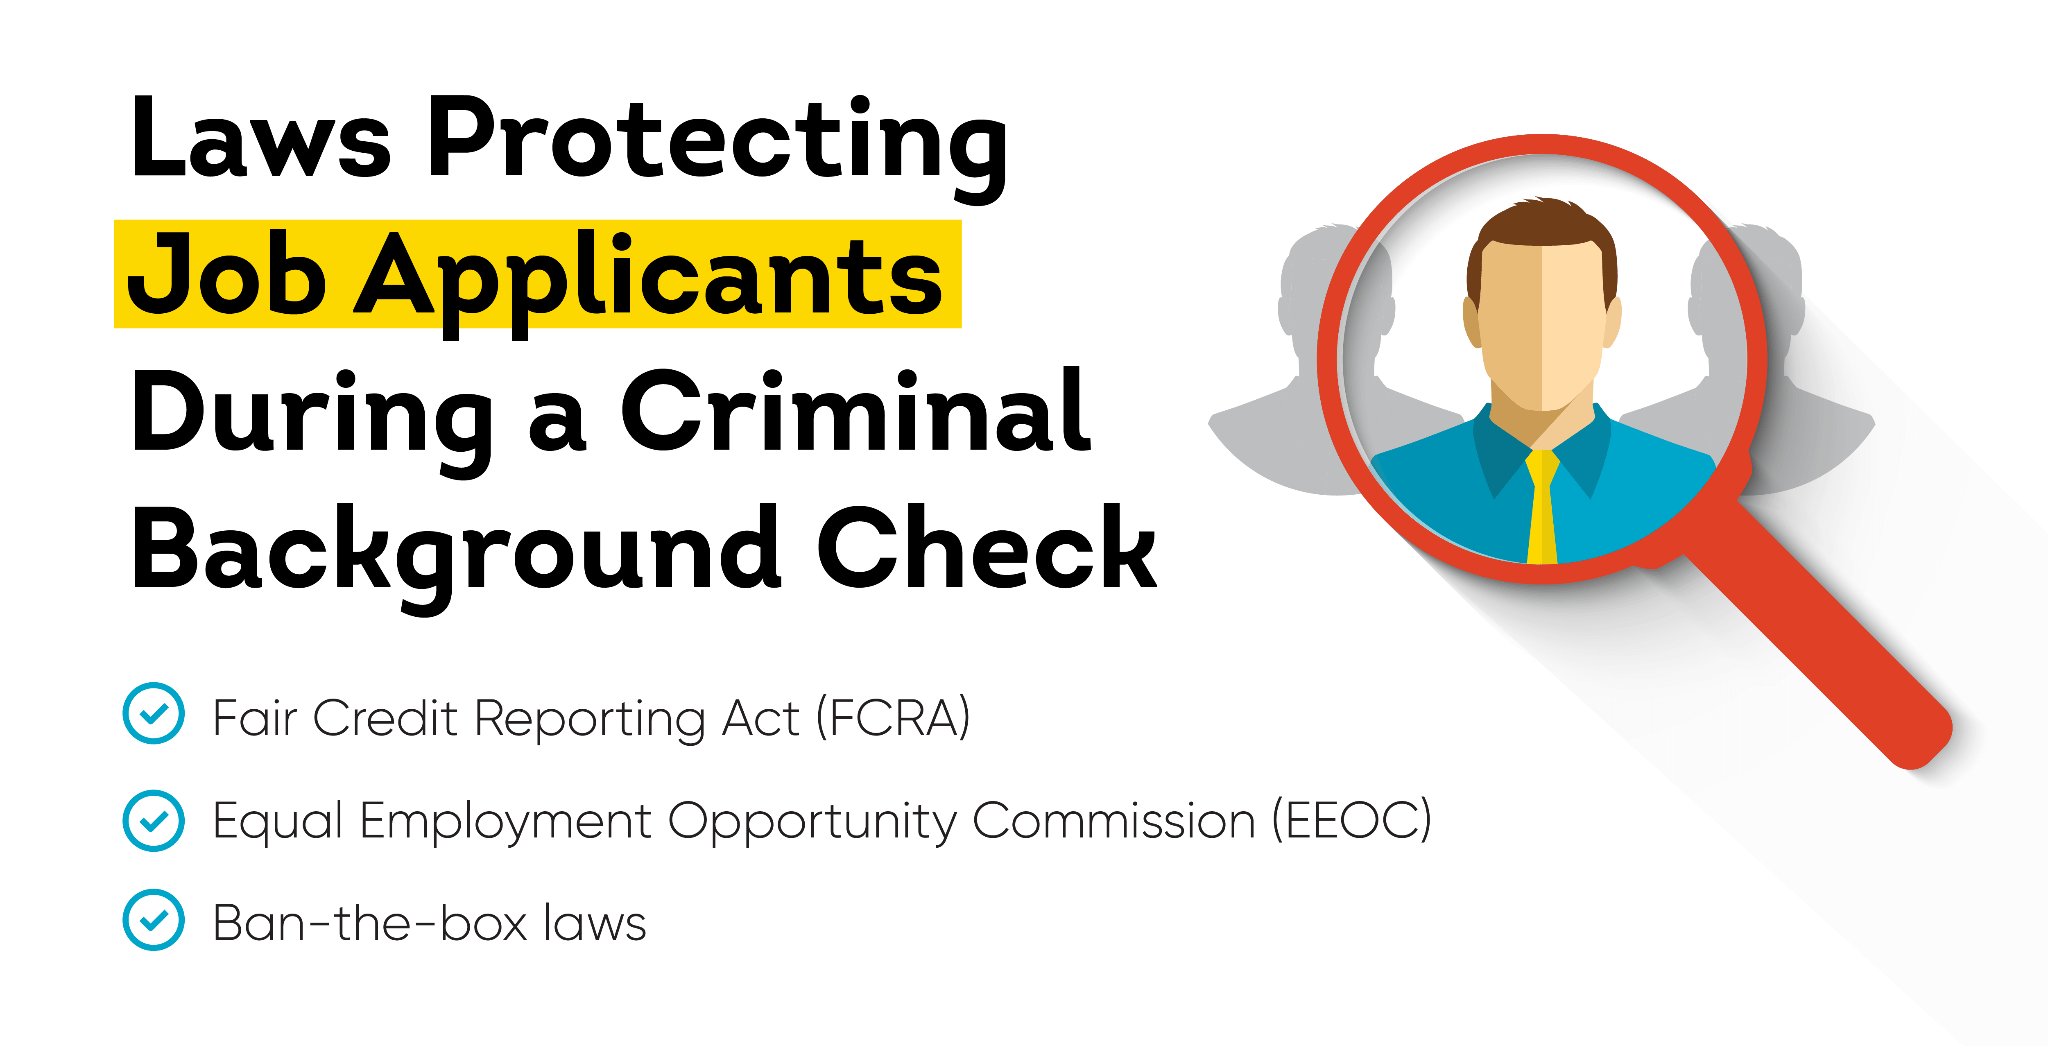 Laws protecting job applicants during criminal background checks include the Fair Credit Reporting Act, Equal Employment Opportunity Commission, and ban-the-box laws.